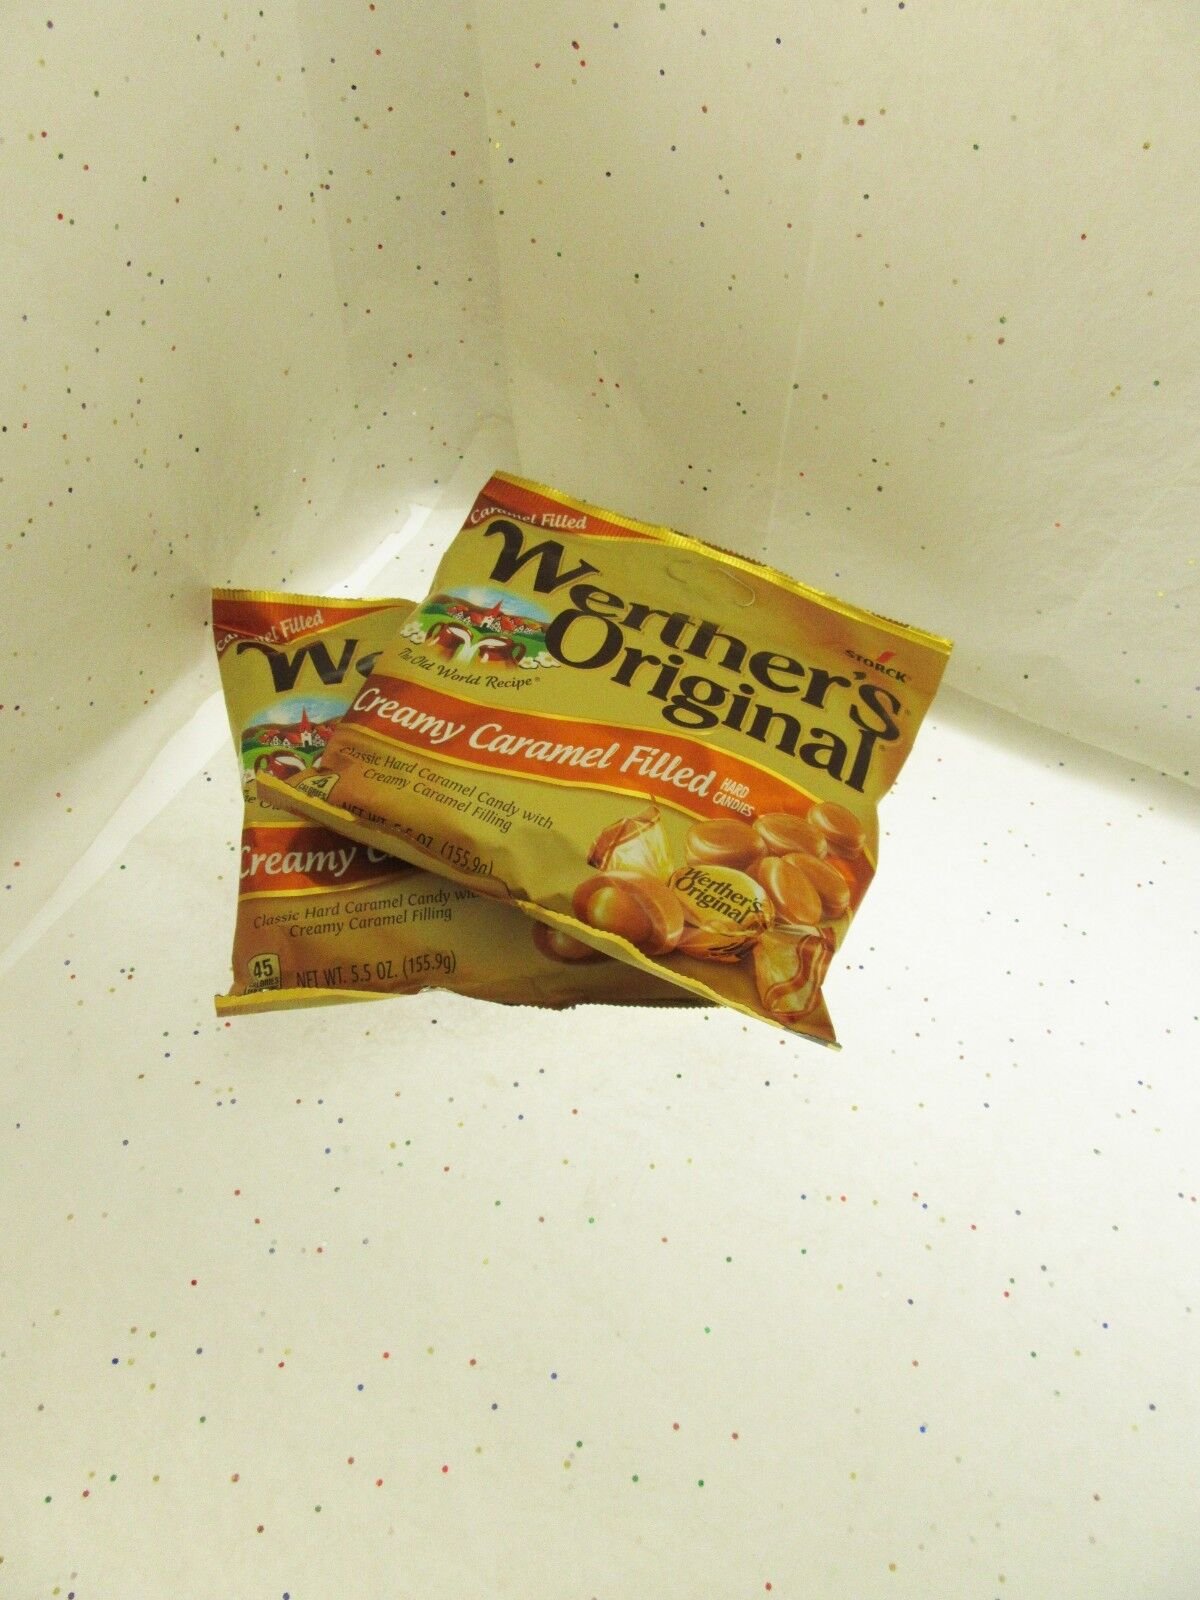 Werther's Original Creamy Caramel Filled 5.5oz Bags Werthers Candies ~ Lot of 2